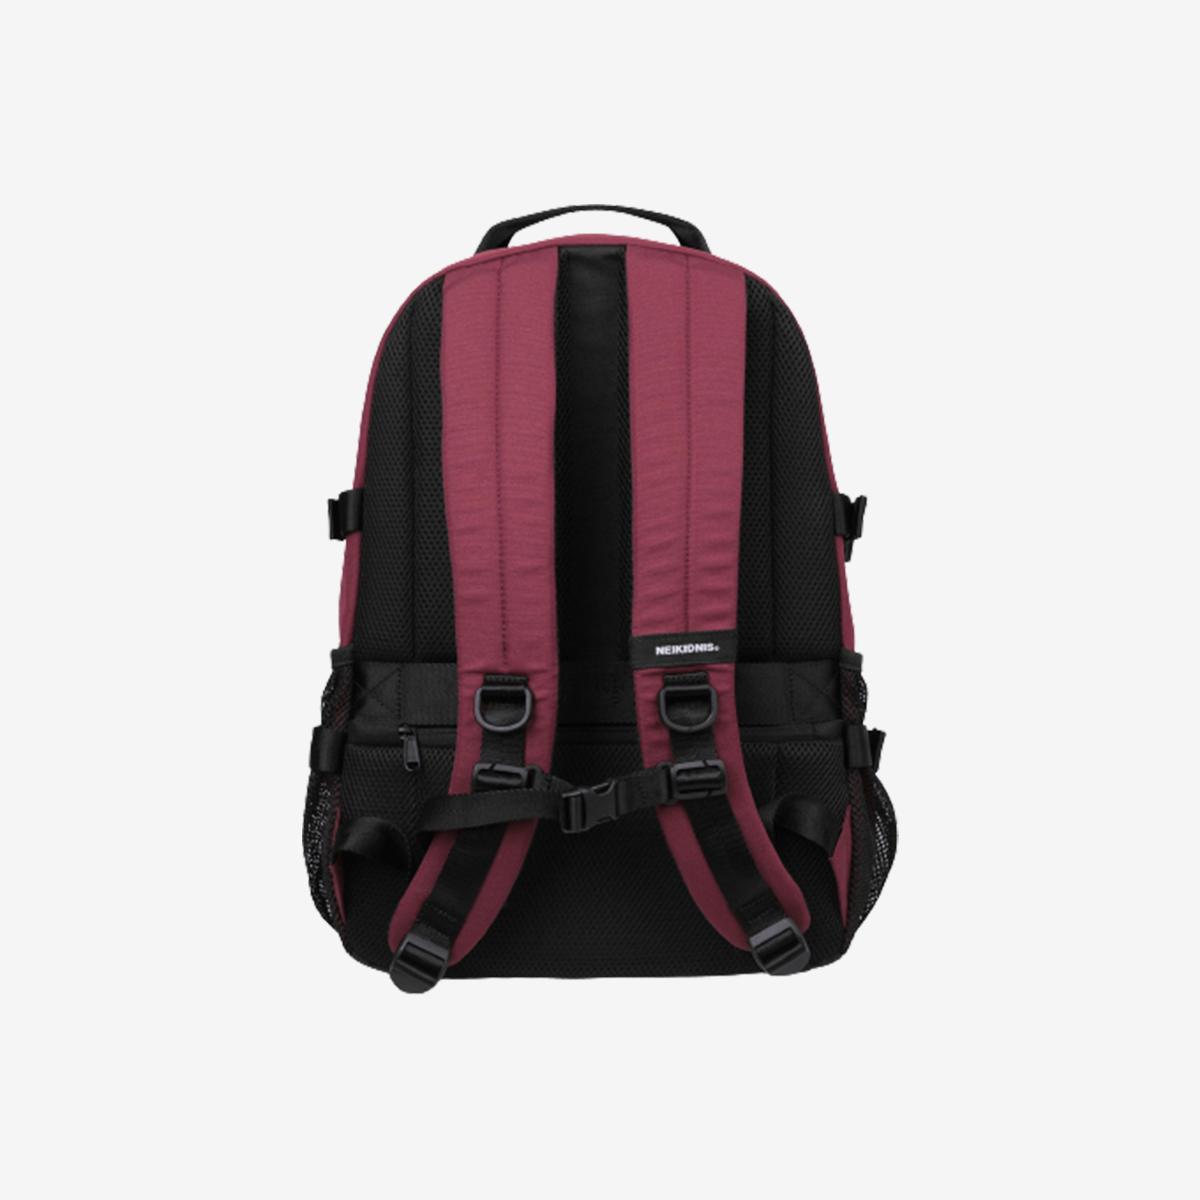 ABSOLUTE BACKPACK 後背包